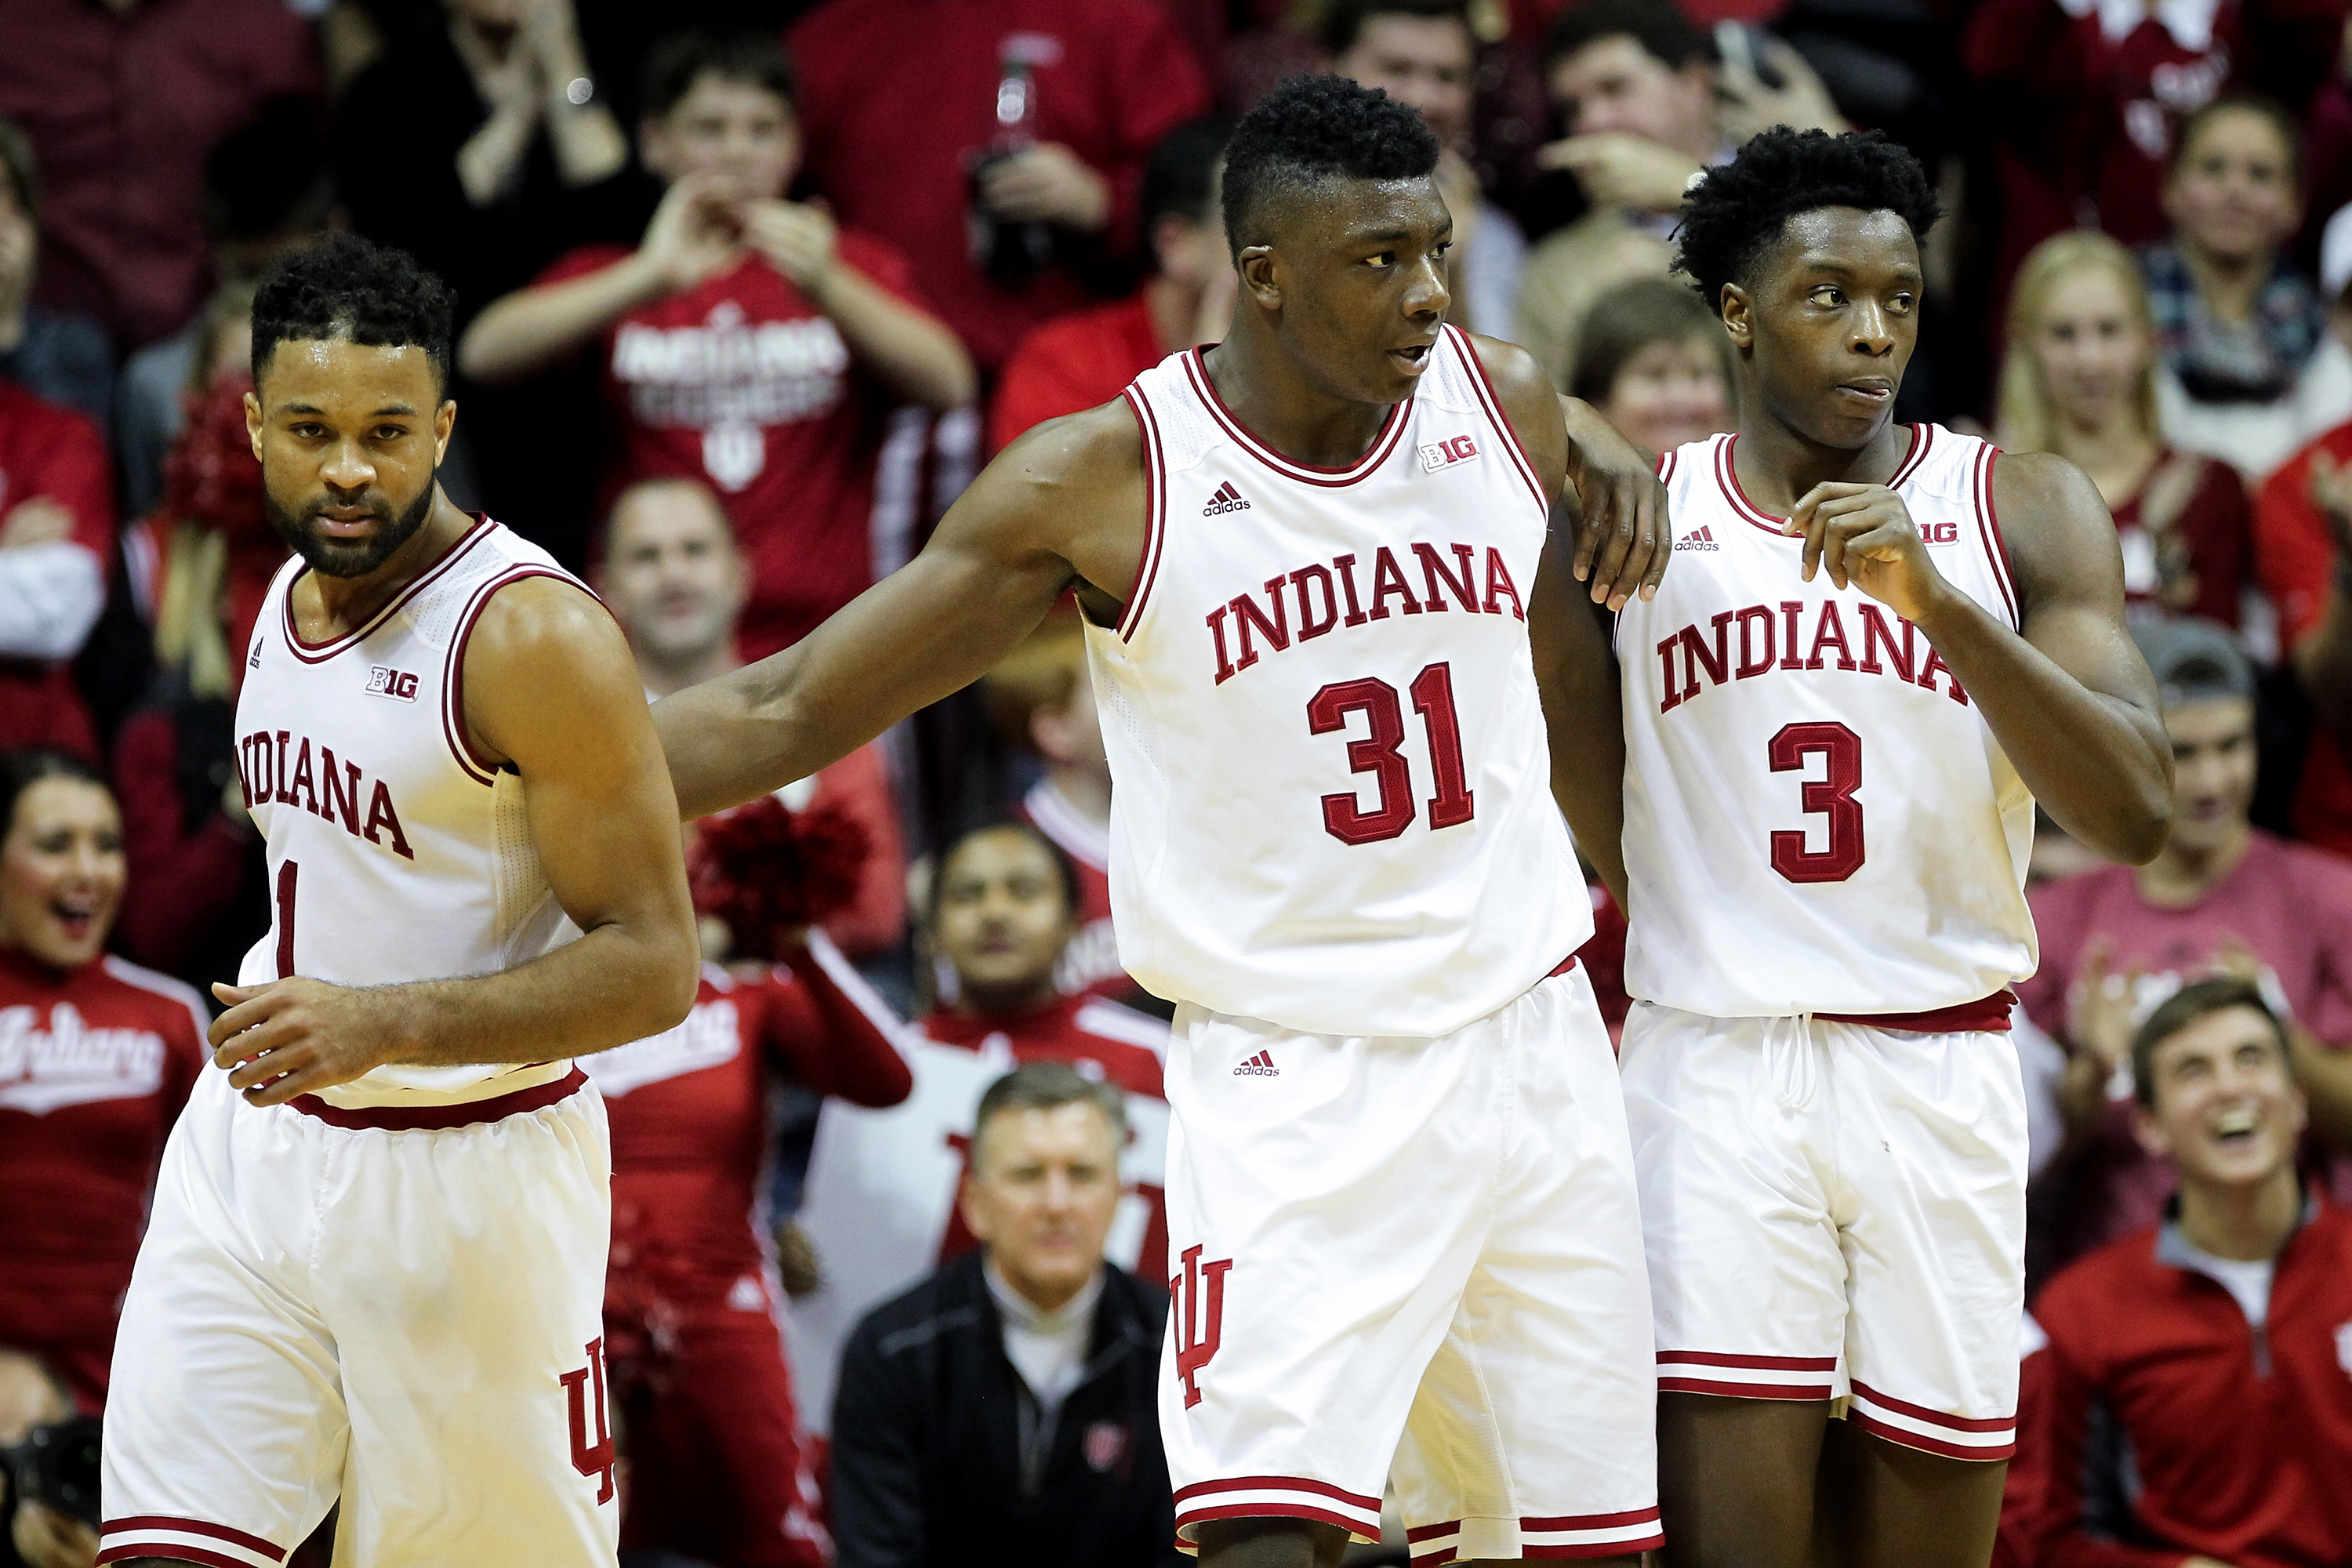 BLOOMINGTON, IN - DECEMBER 28: James Blackmon Jr. #1, Thomas Bryant #31, and OG Anunoby #3 of the Indiana Hoosiers meet in the second half against the Nebraska Cornhuskers at Assembly Hall on December 28, 2016 in Bloomington, Indiana. (Photo by Dylan Buell/Getty Images)